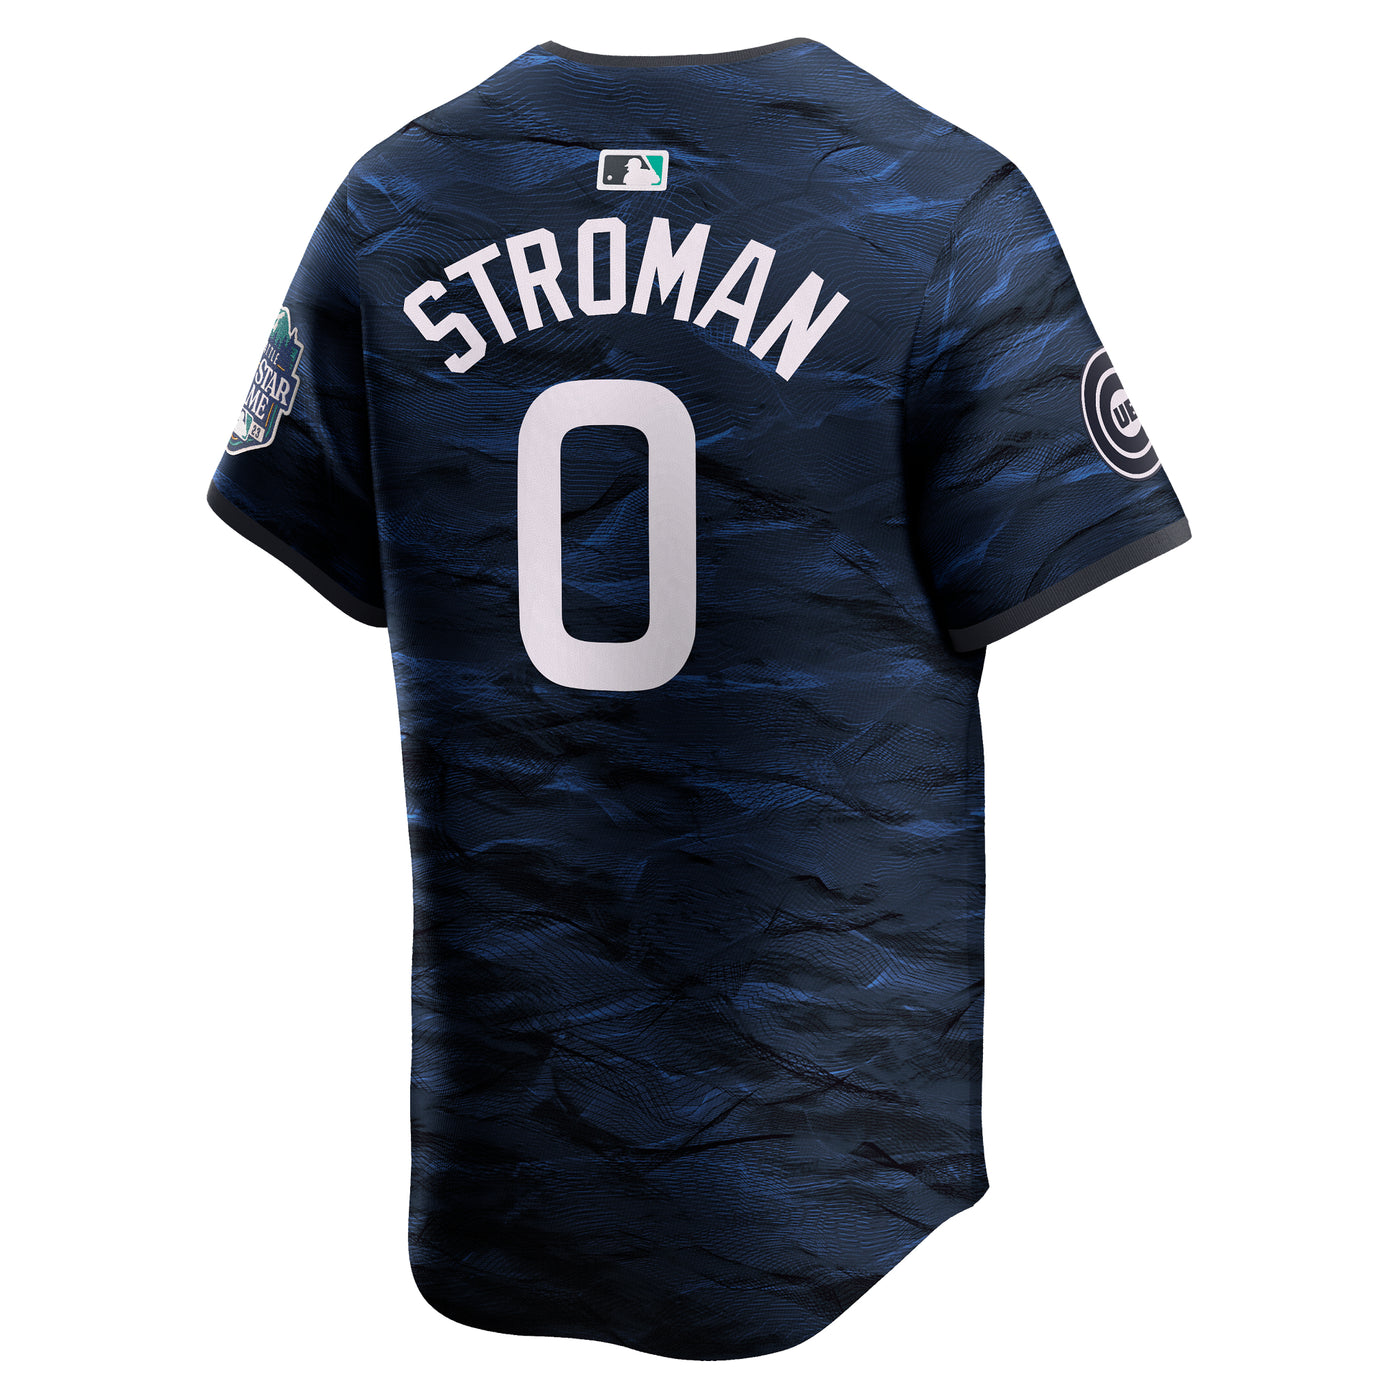 CHICAGO CUBS STROMAN ALL STAR GAME 2023 JERSEY